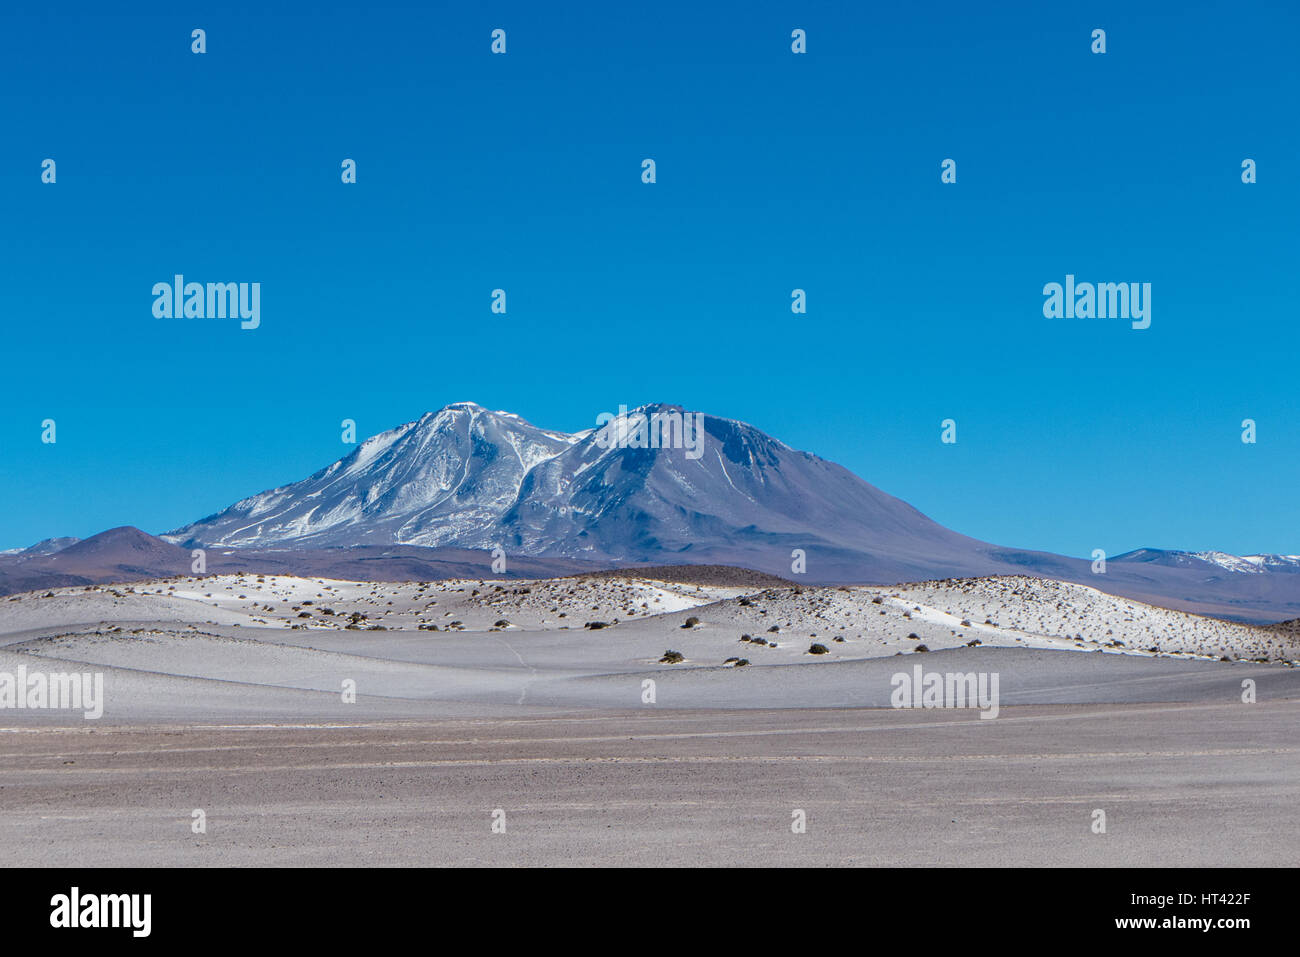 Andean landscape, Atacama desert north Chile. Volcanic ash in the foreground and snow on the peaks in the background Stock Photo